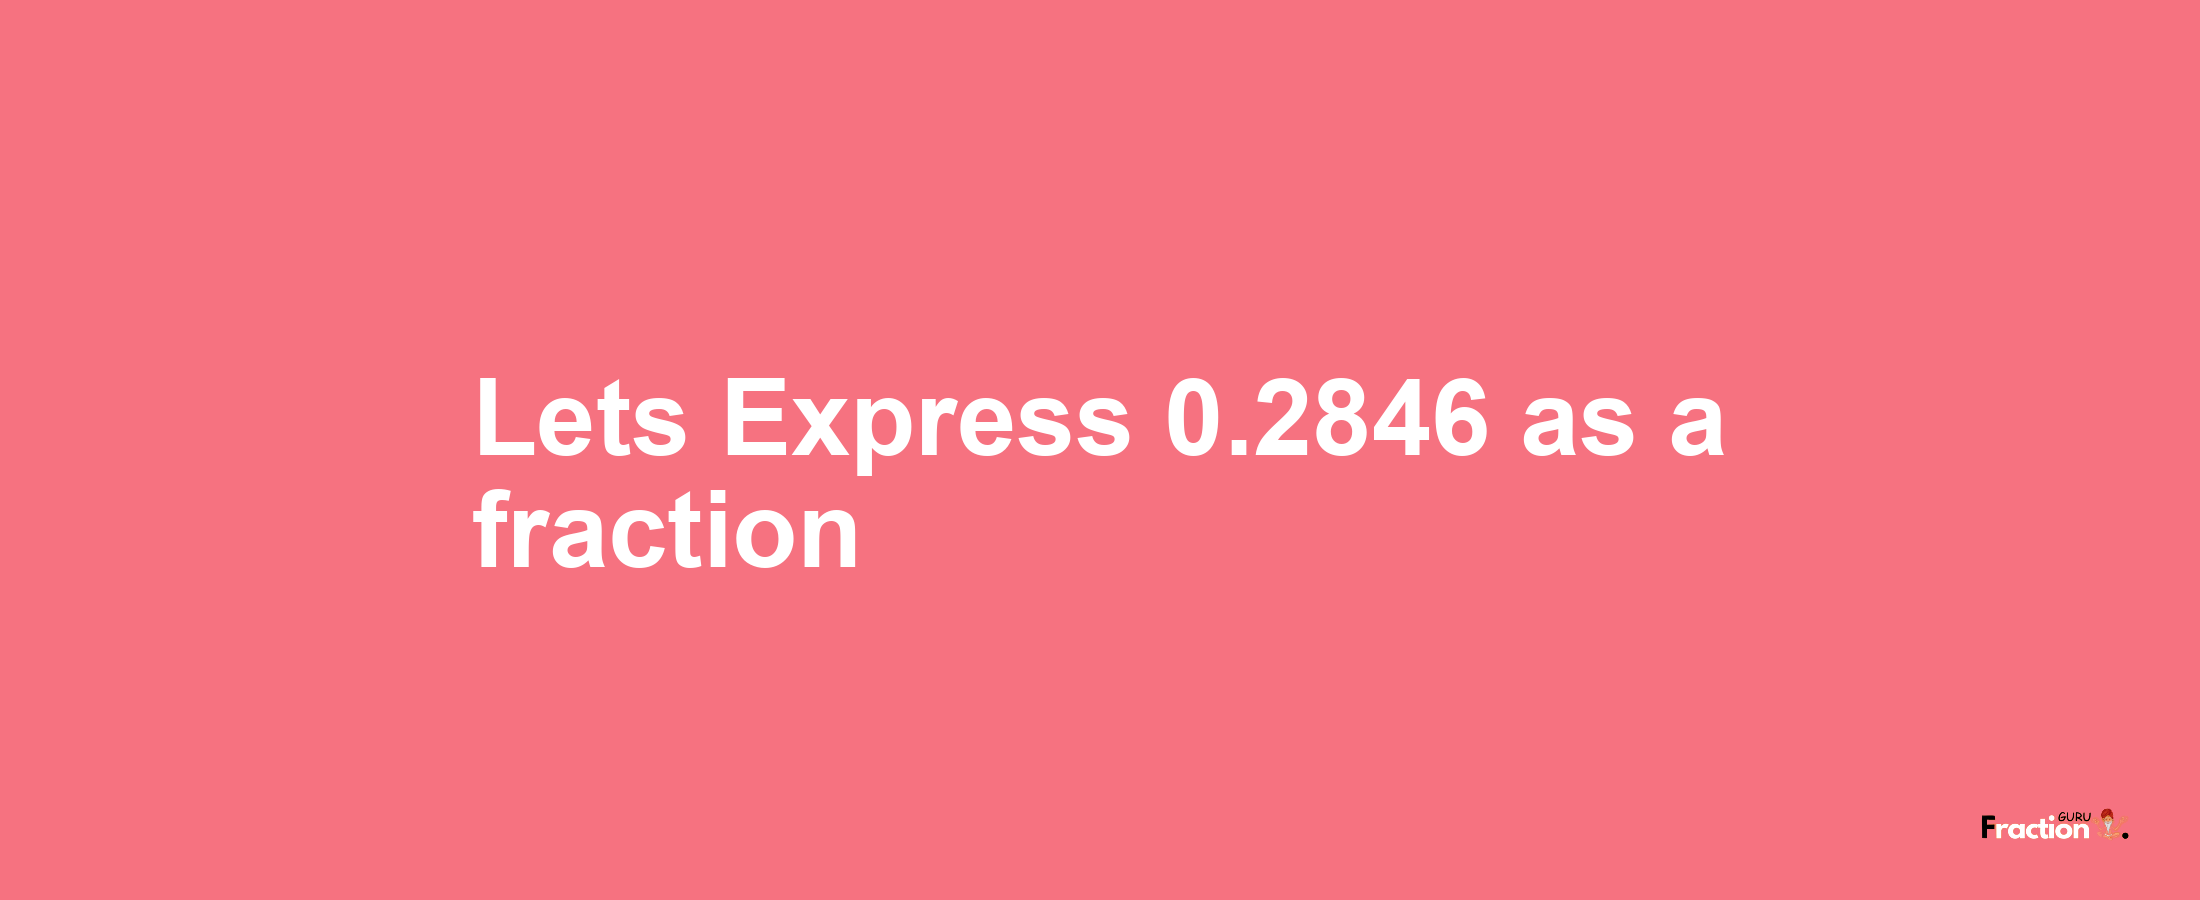 Lets Express 0.2846 as afraction